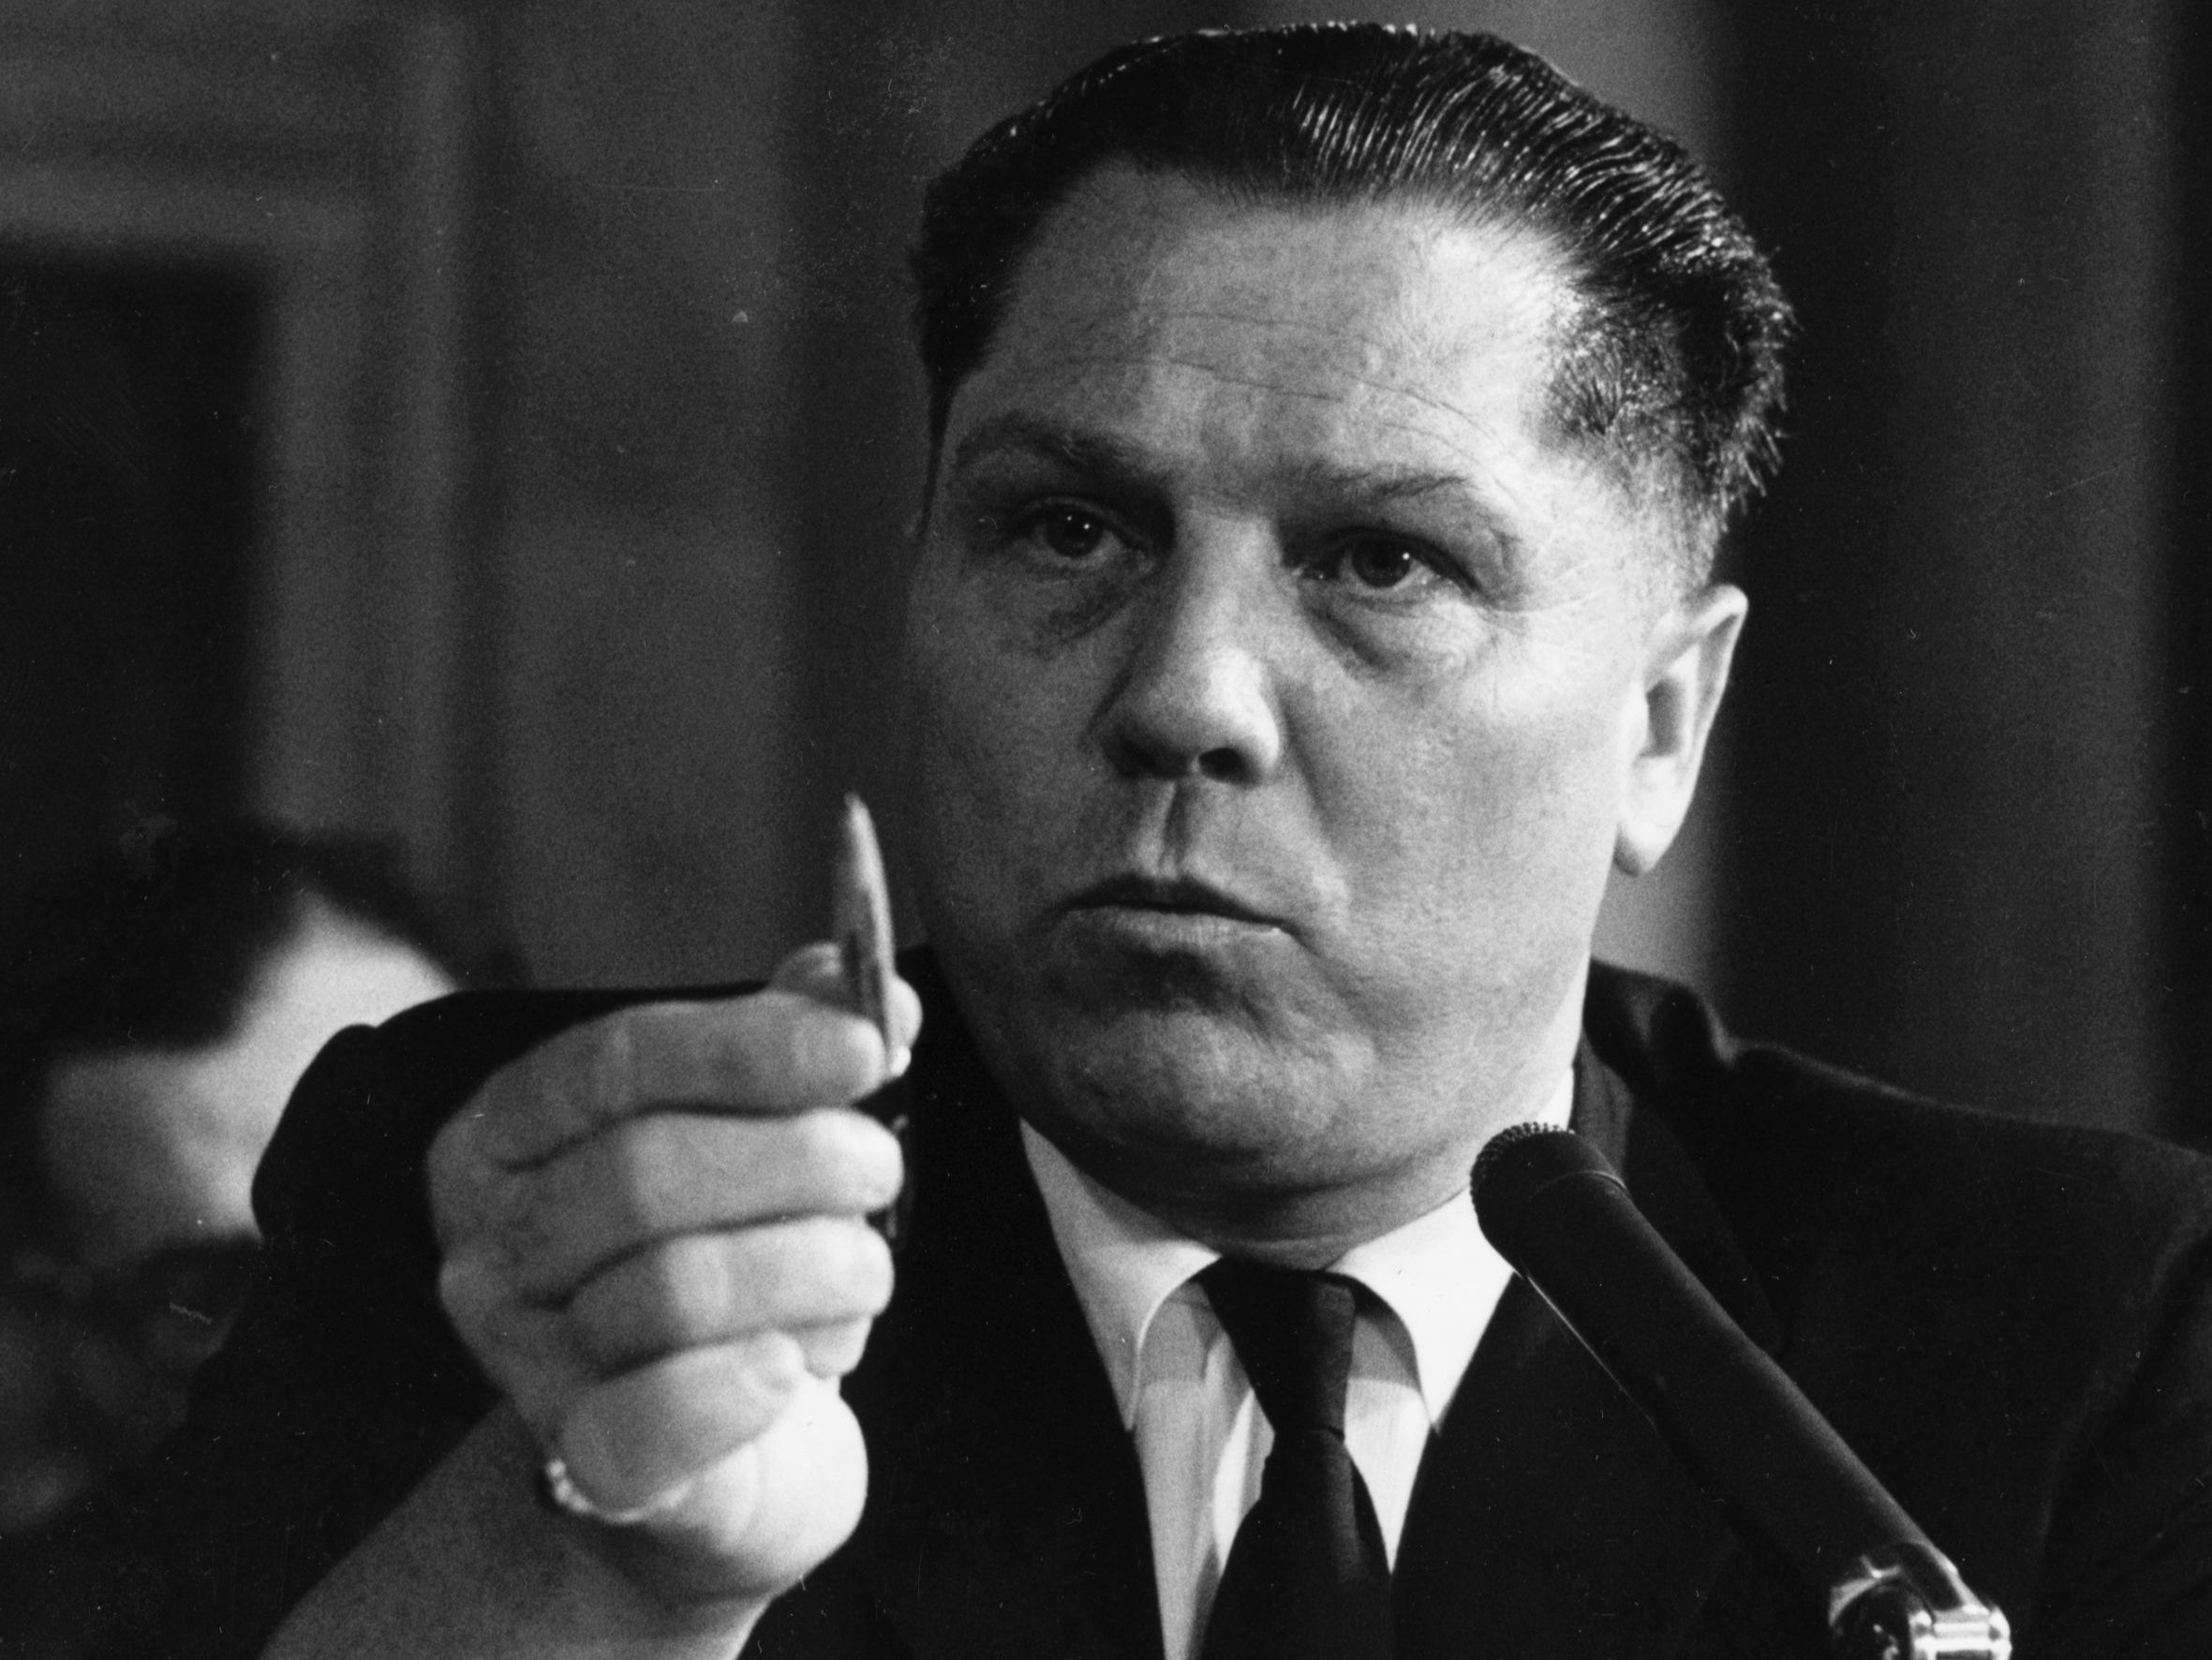 <p>American labour leader Jimmy Hoffa (1913 - 1975), President of the Teamster’s Union, testifying at a hearing investigating labor rackets on 11 August 1958</p>